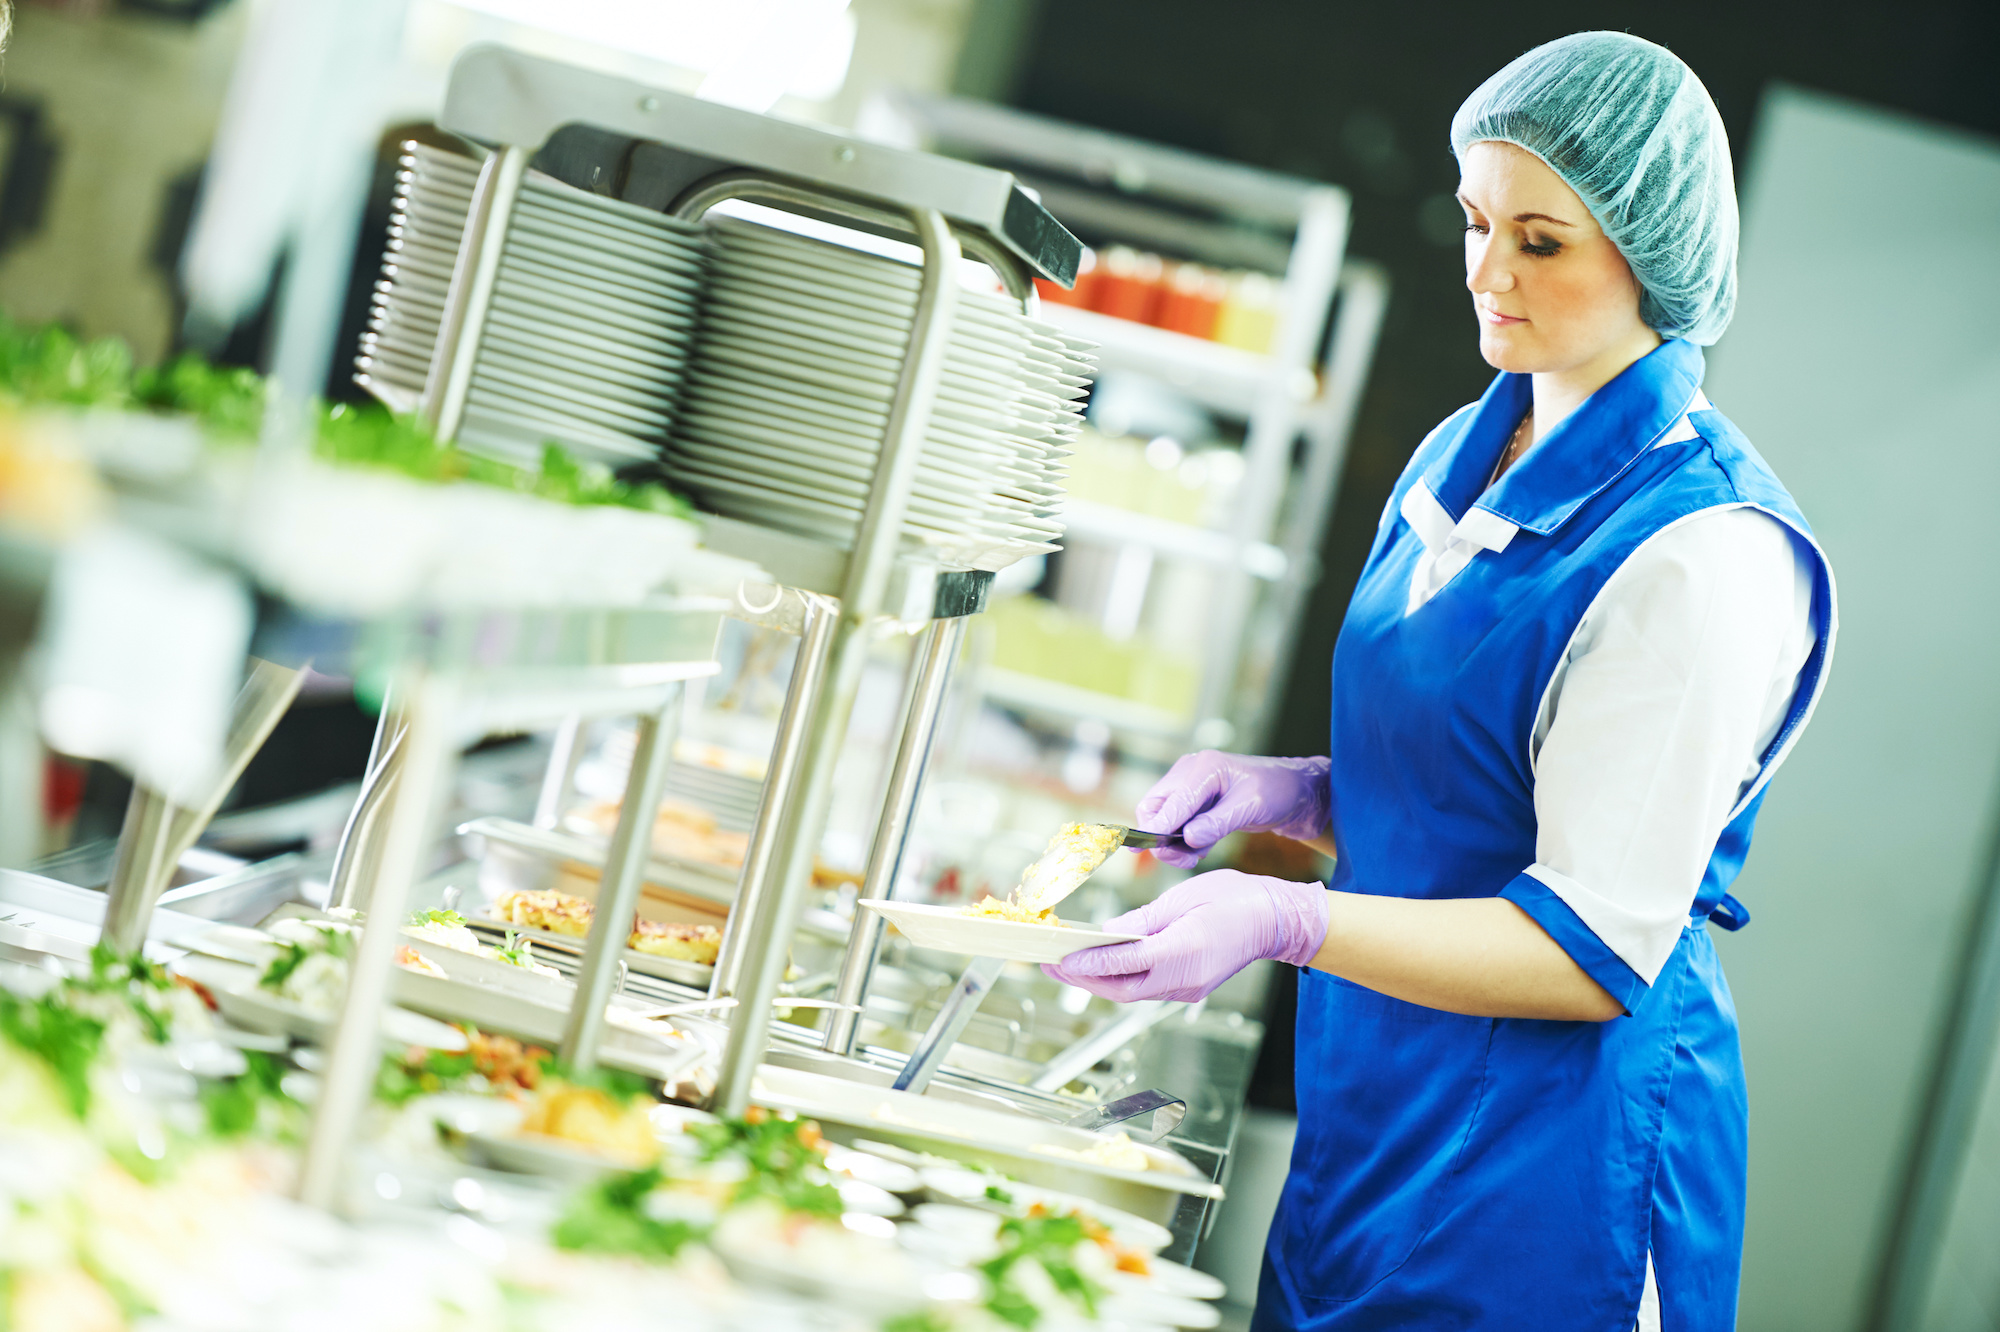 Personal Protective gear in the food industry